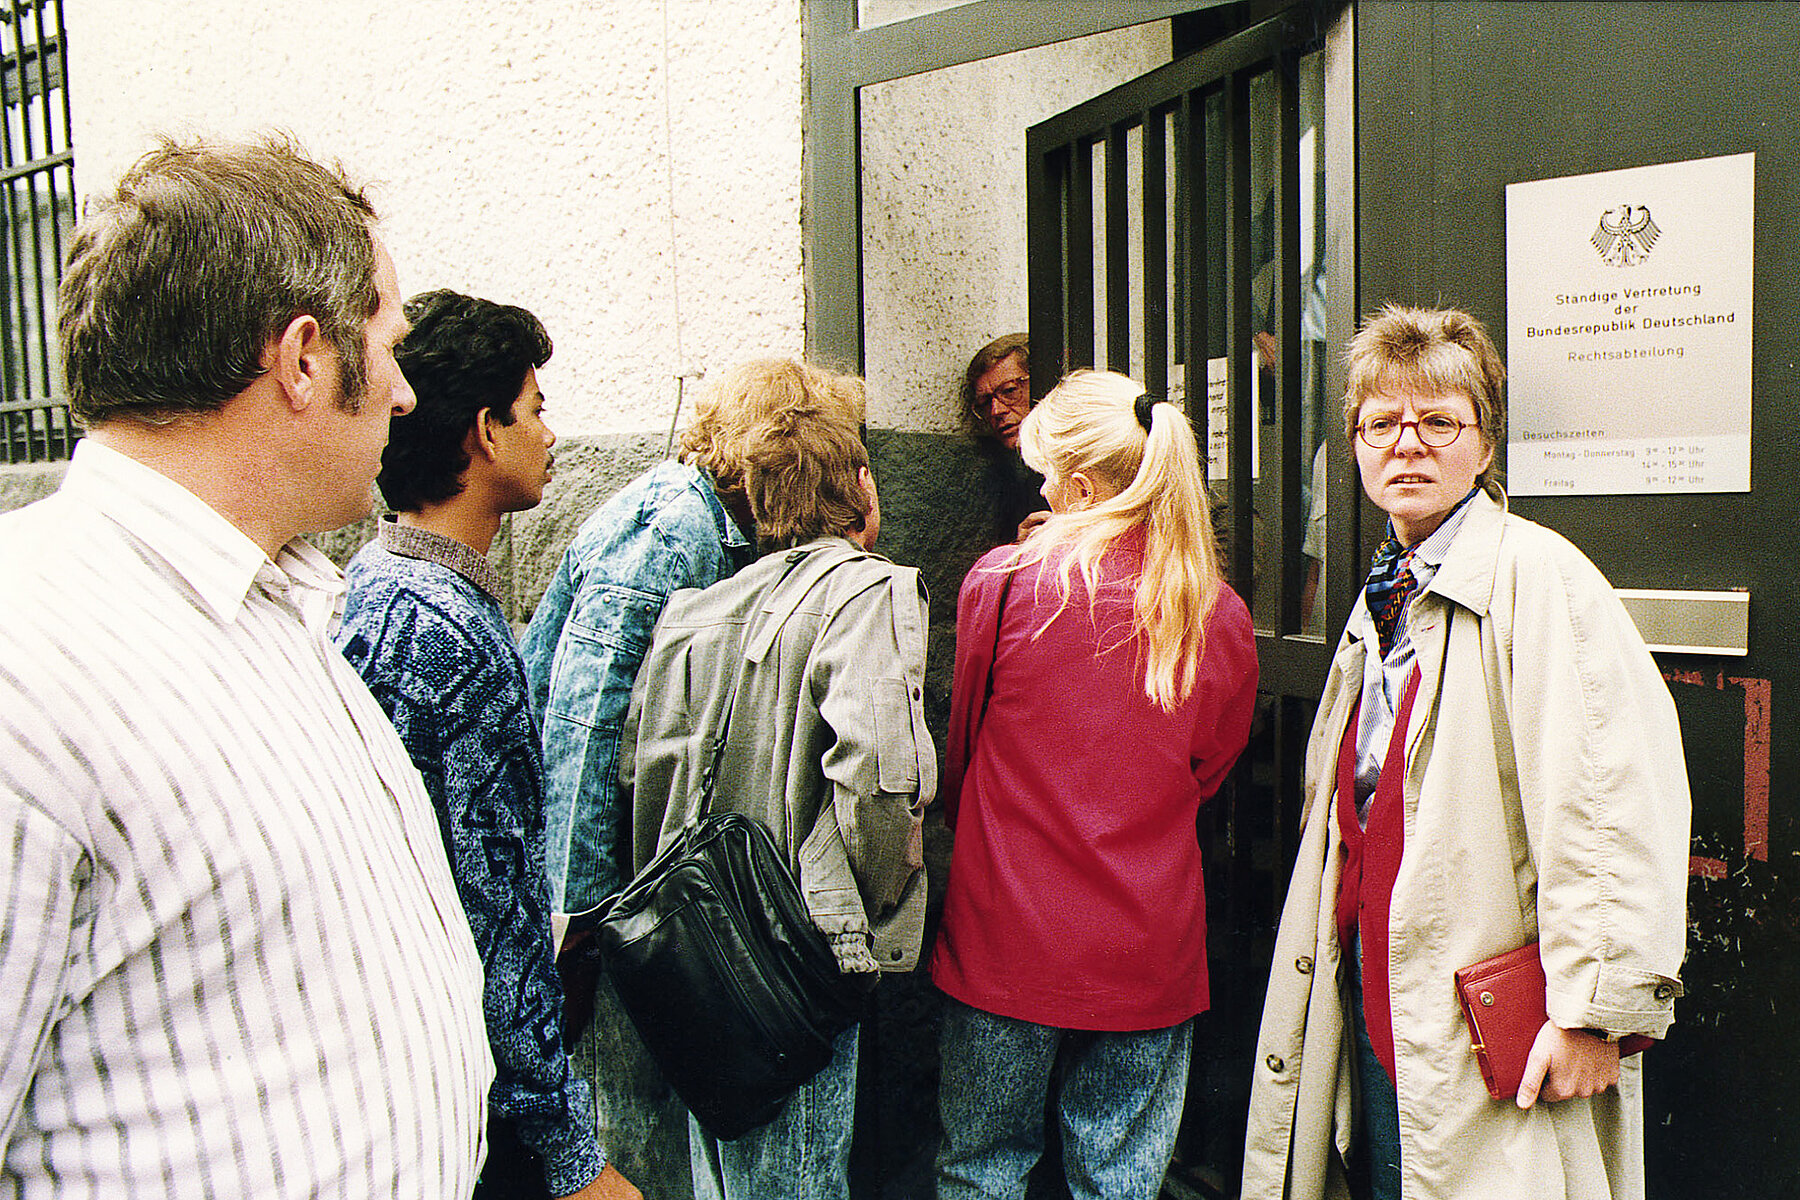 People at the entrance of the Ständige Vertretung.